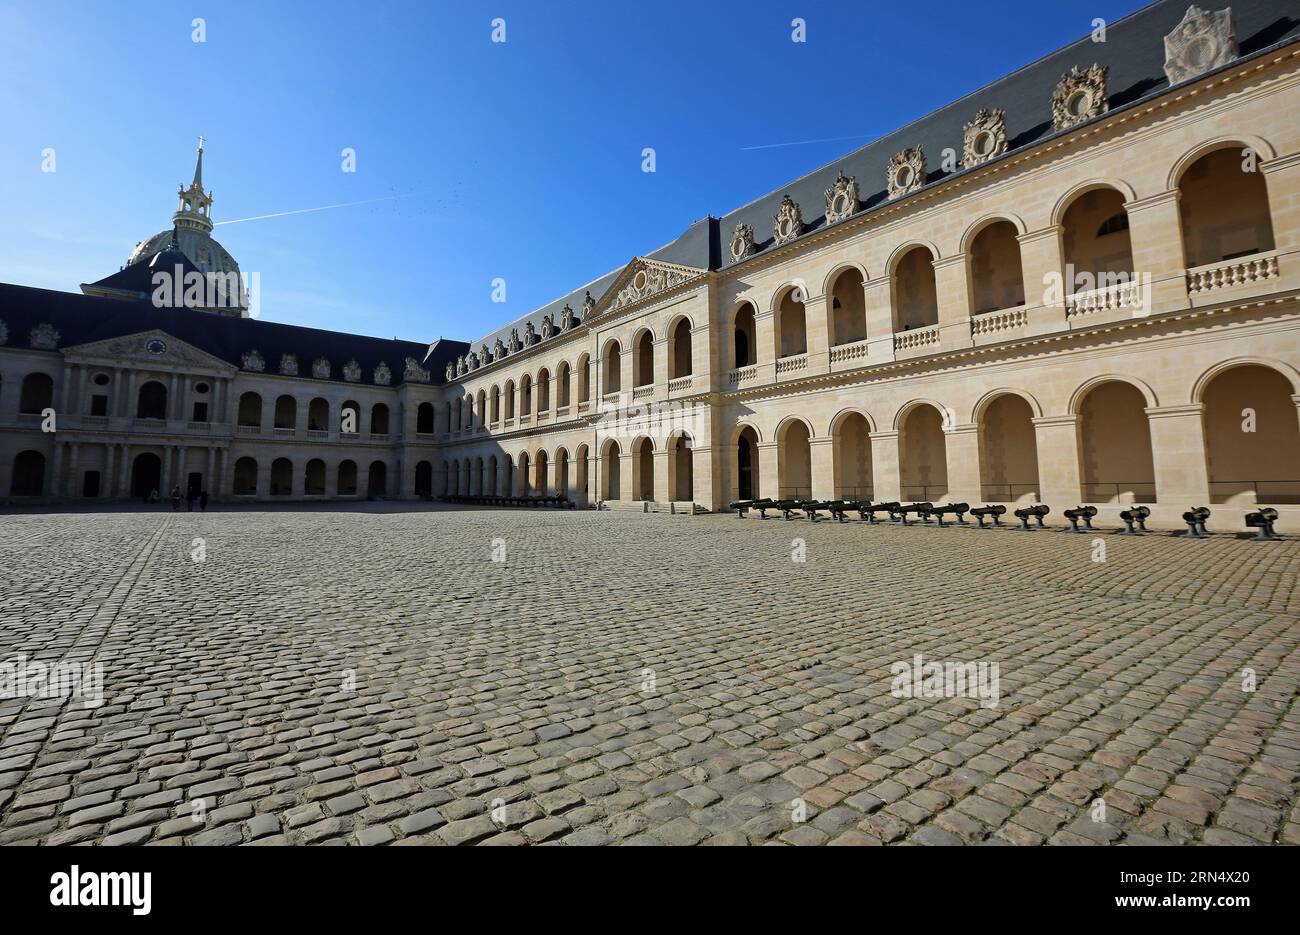 The dome and The Army Museum, Paris, France Stock Photo